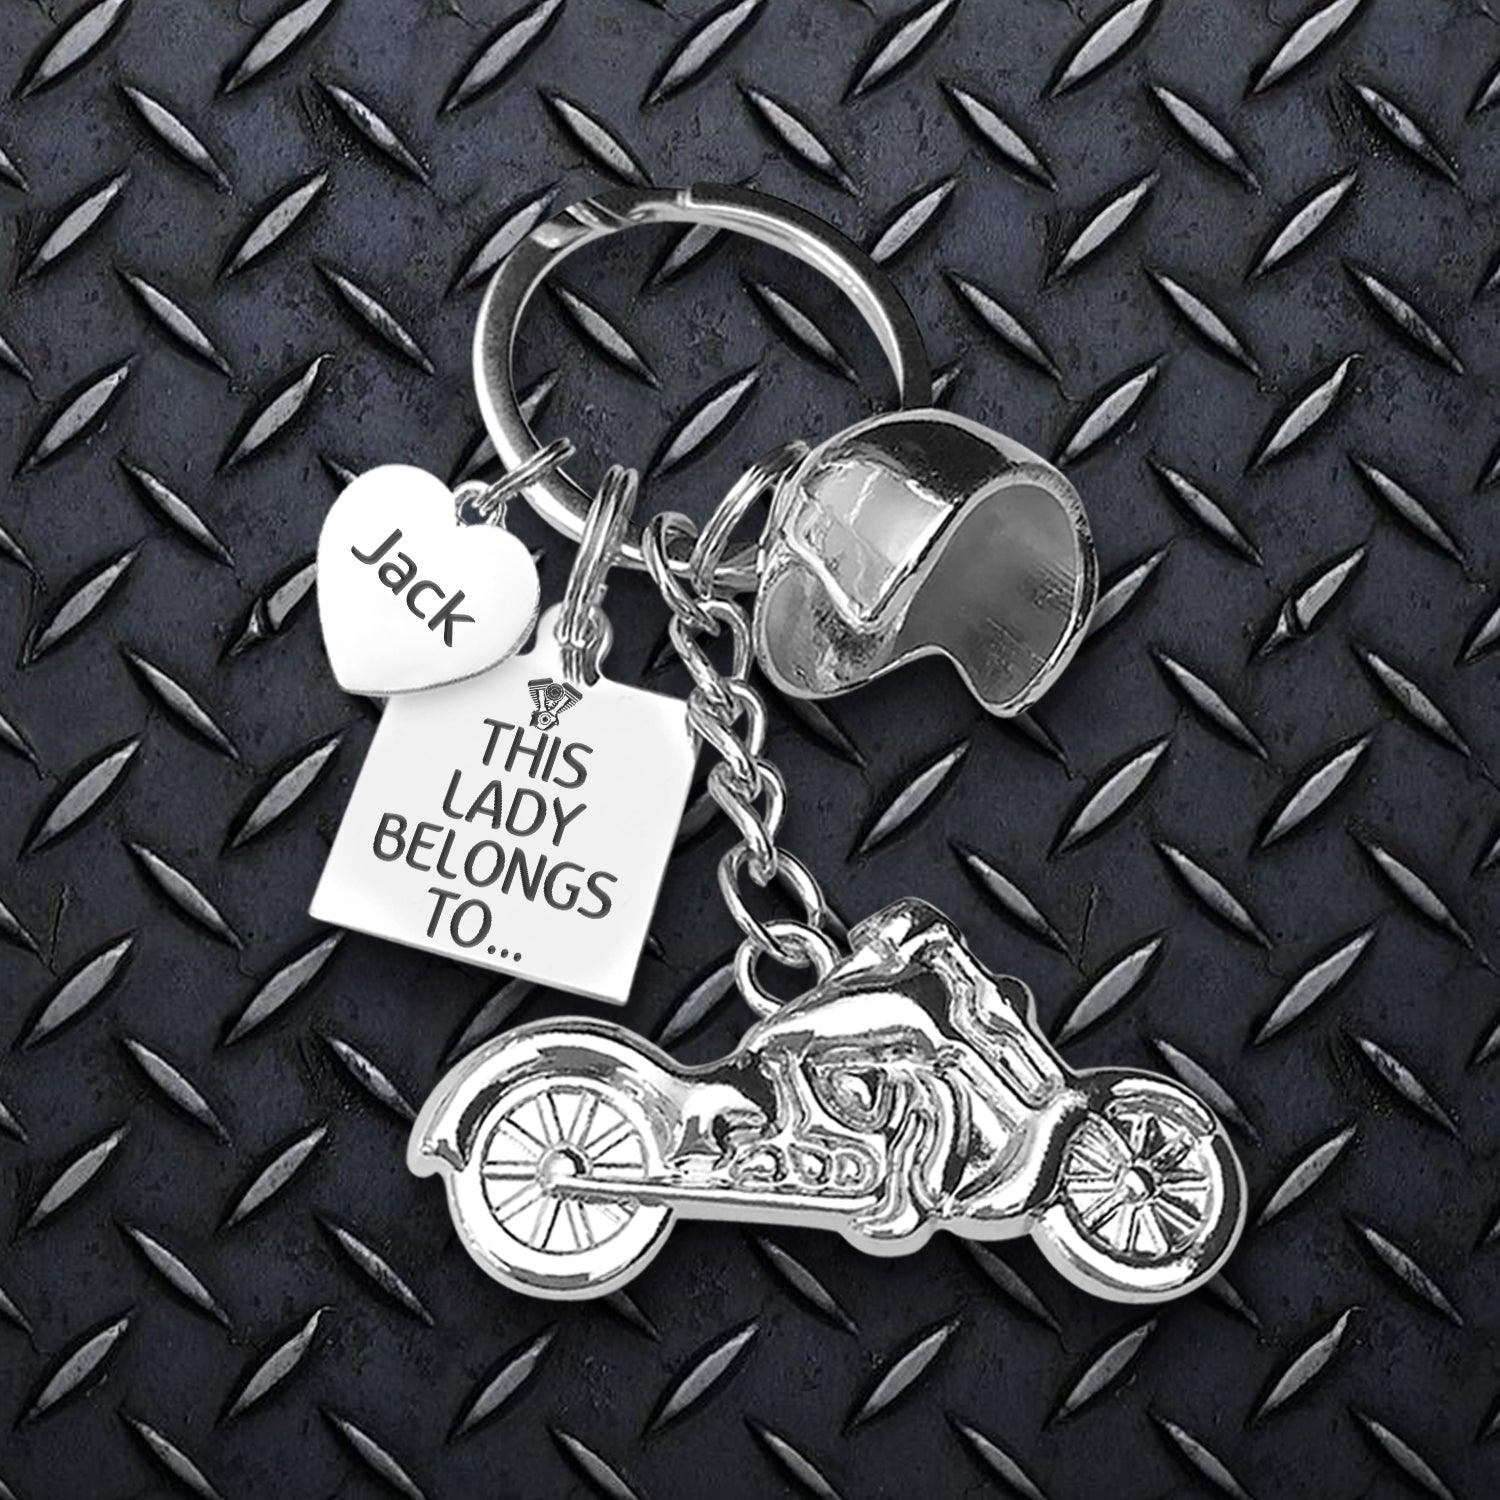 Personalised Classic Bike Keychain - Biker - To My Lady - I Love You - Augkt13003 - Gifts Holder